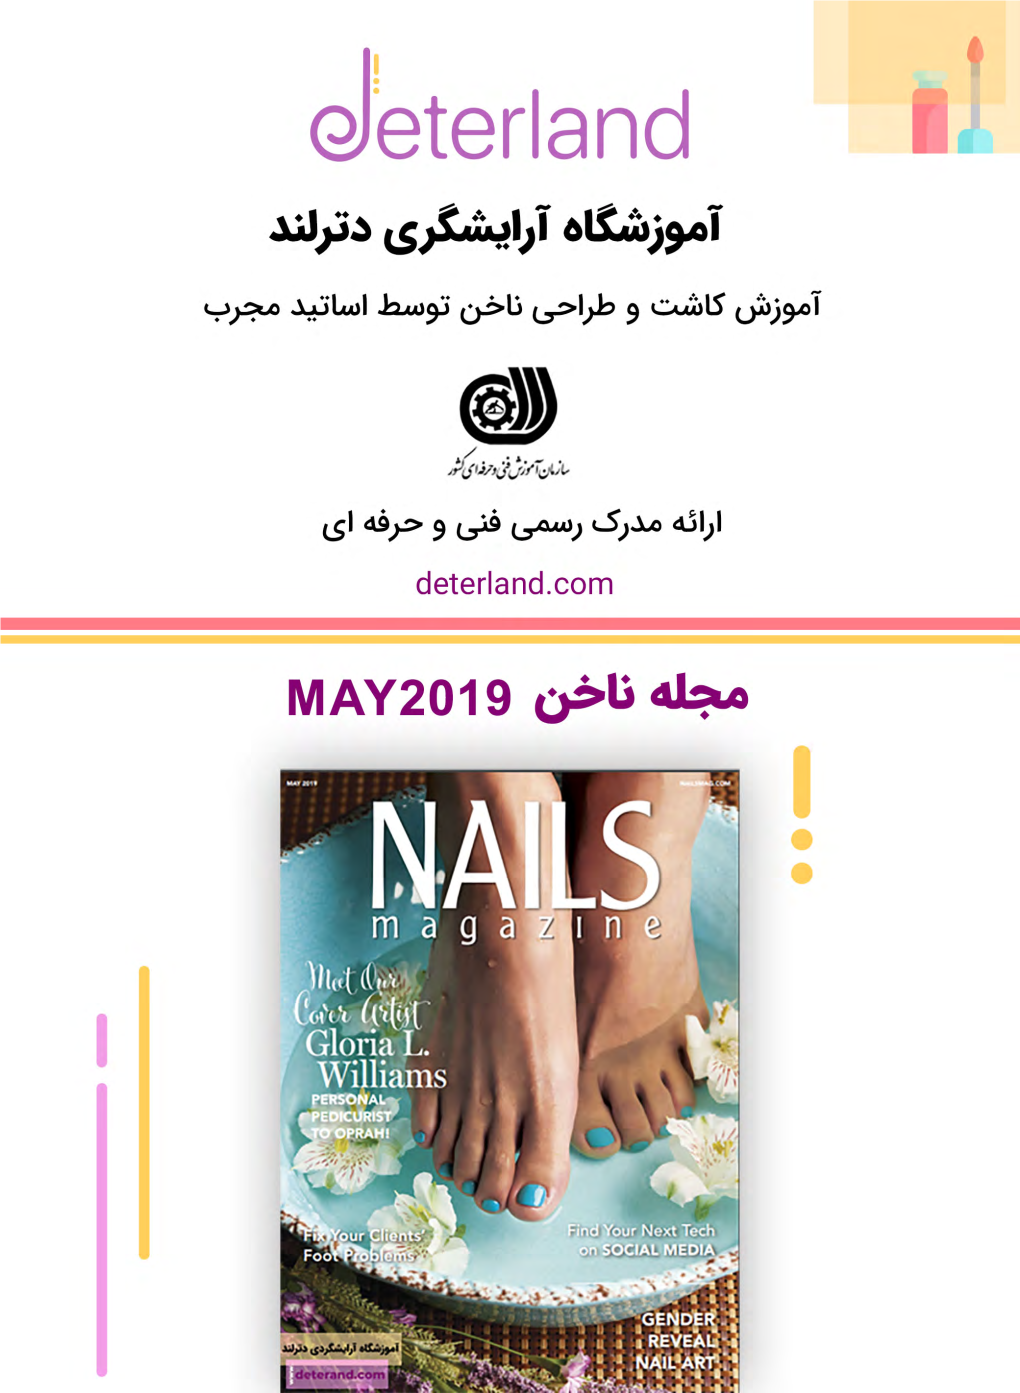 Essential Reading for Nail Art Lovers